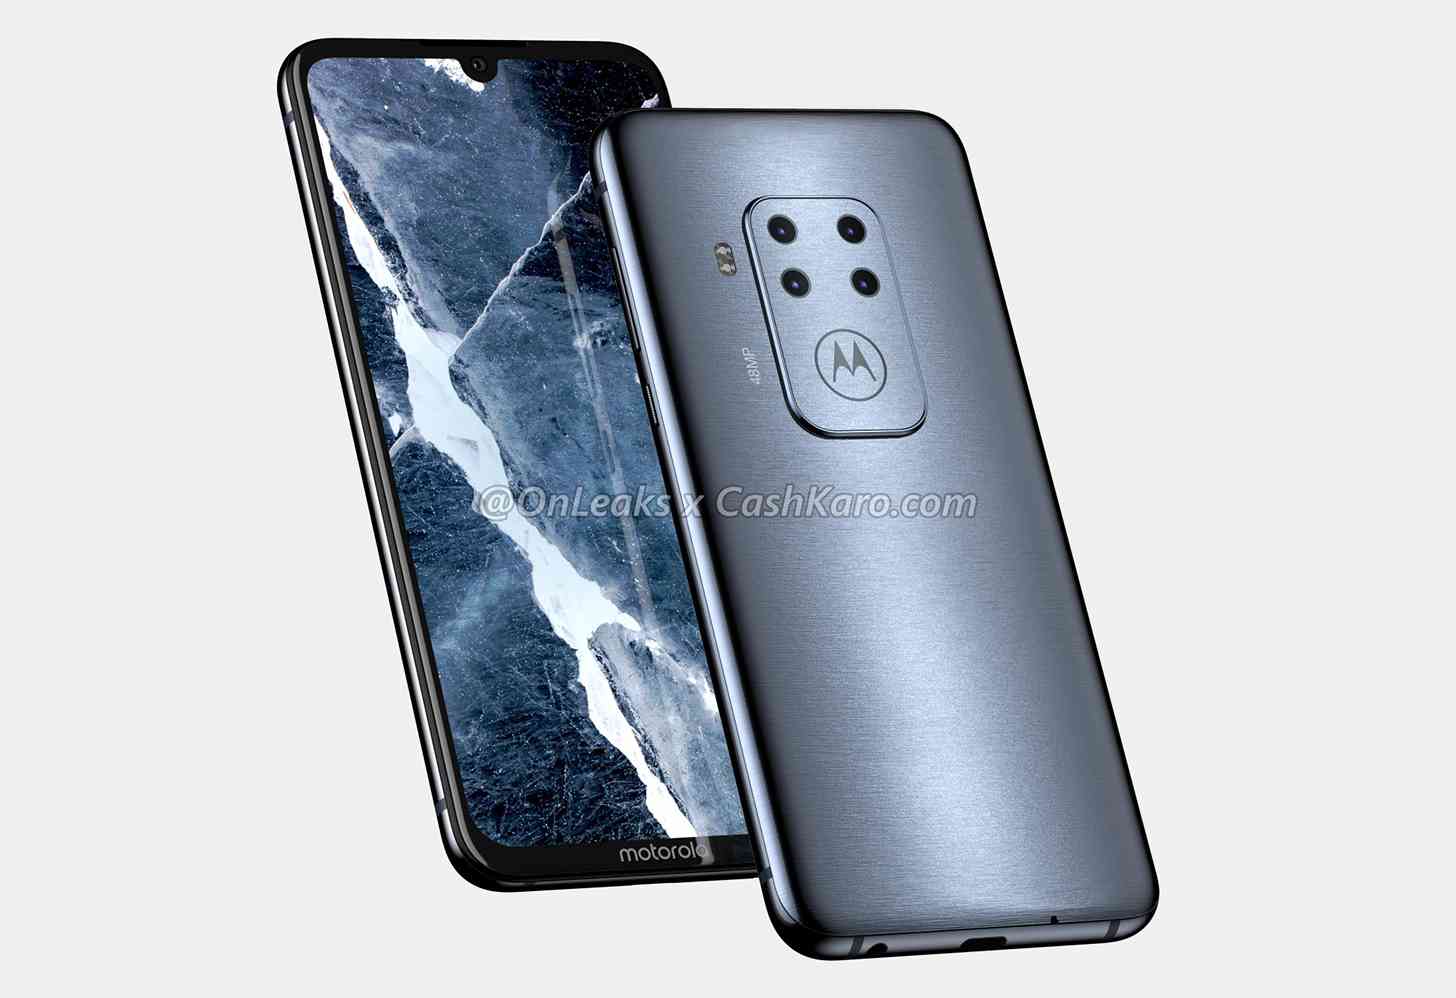 The first leaked pictures of Motorola's new smartphone